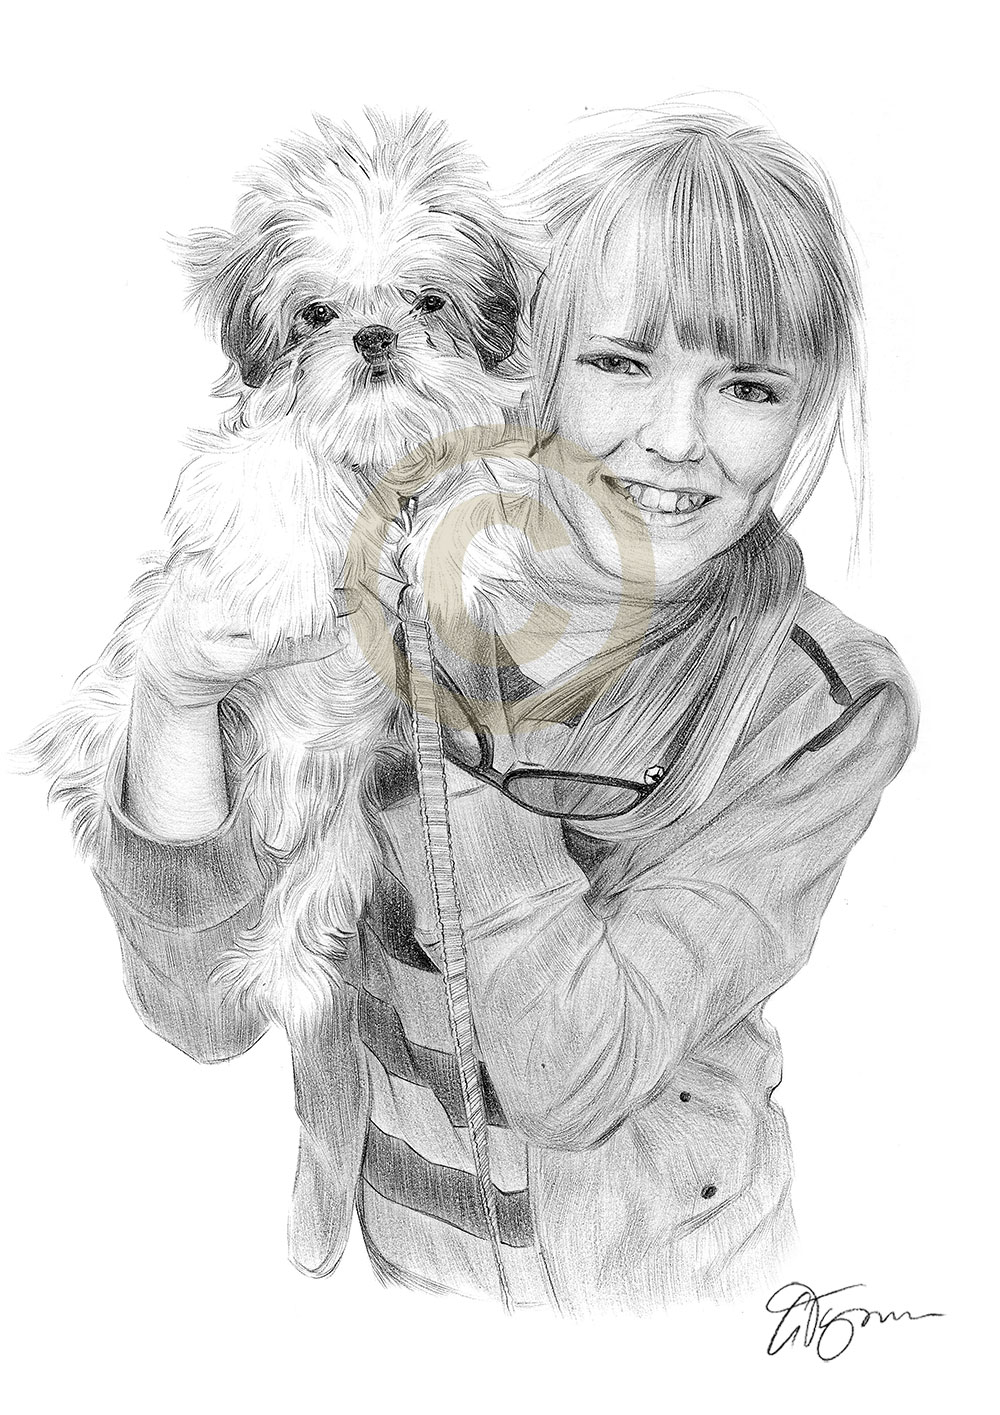 Pencil portrait commission of a girl and dog by artist Gary Tymon